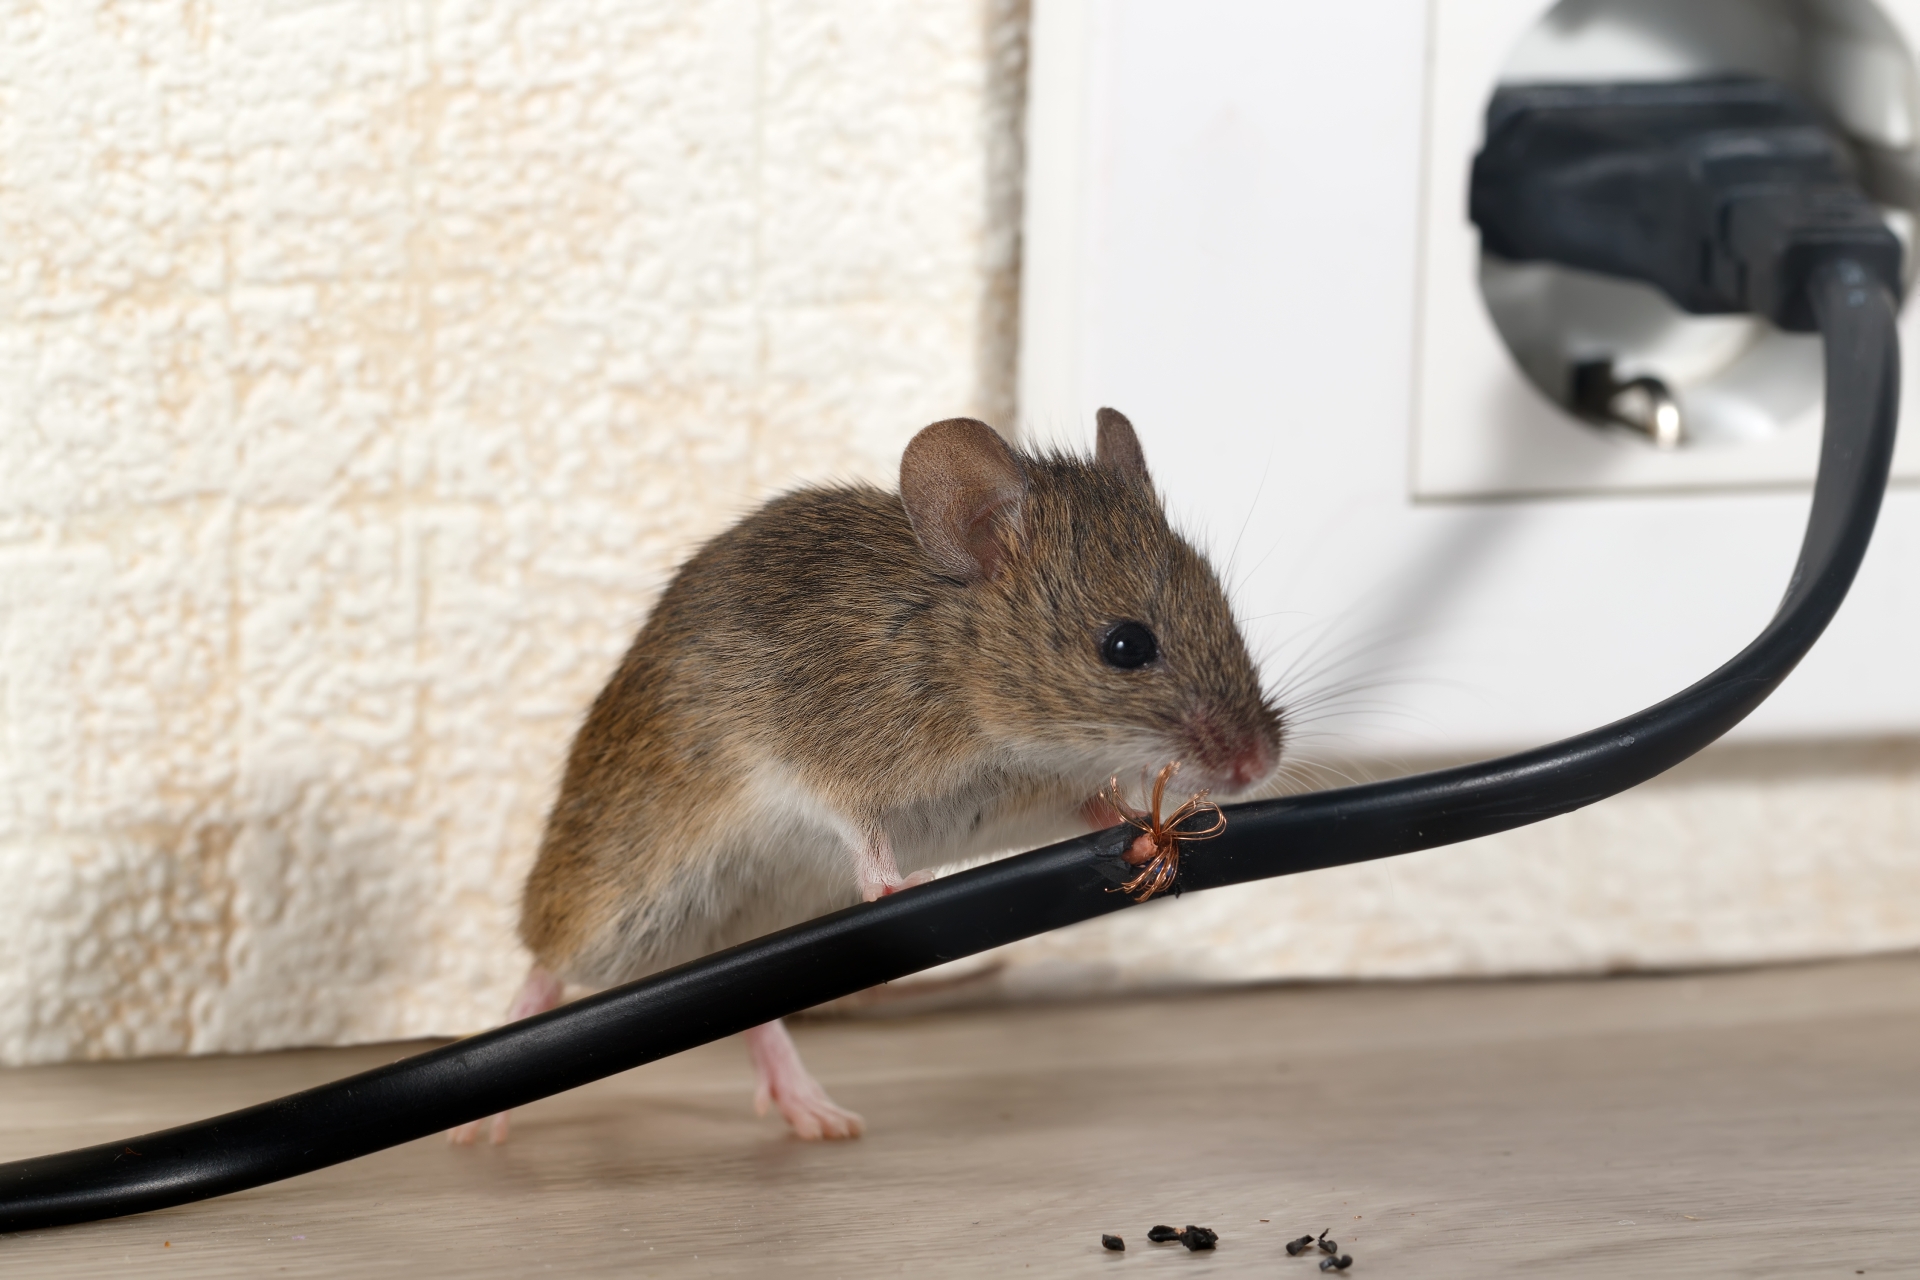 Mice Infestation, Pest Control in Northwood, Moor Park, HA6. Call Now 020 8166 9746